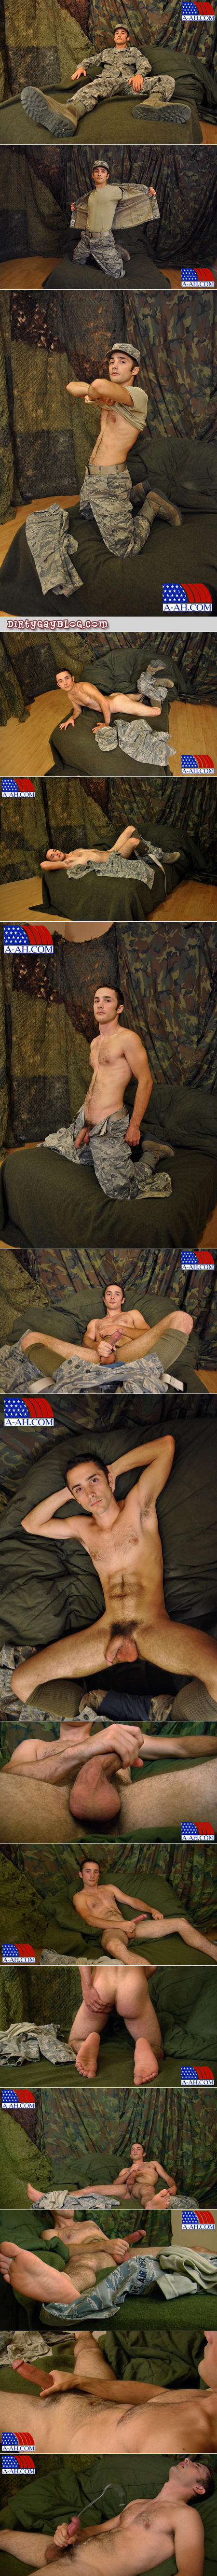 Handsome, hairy guy in military fatigues jerking off shoots a huge load.